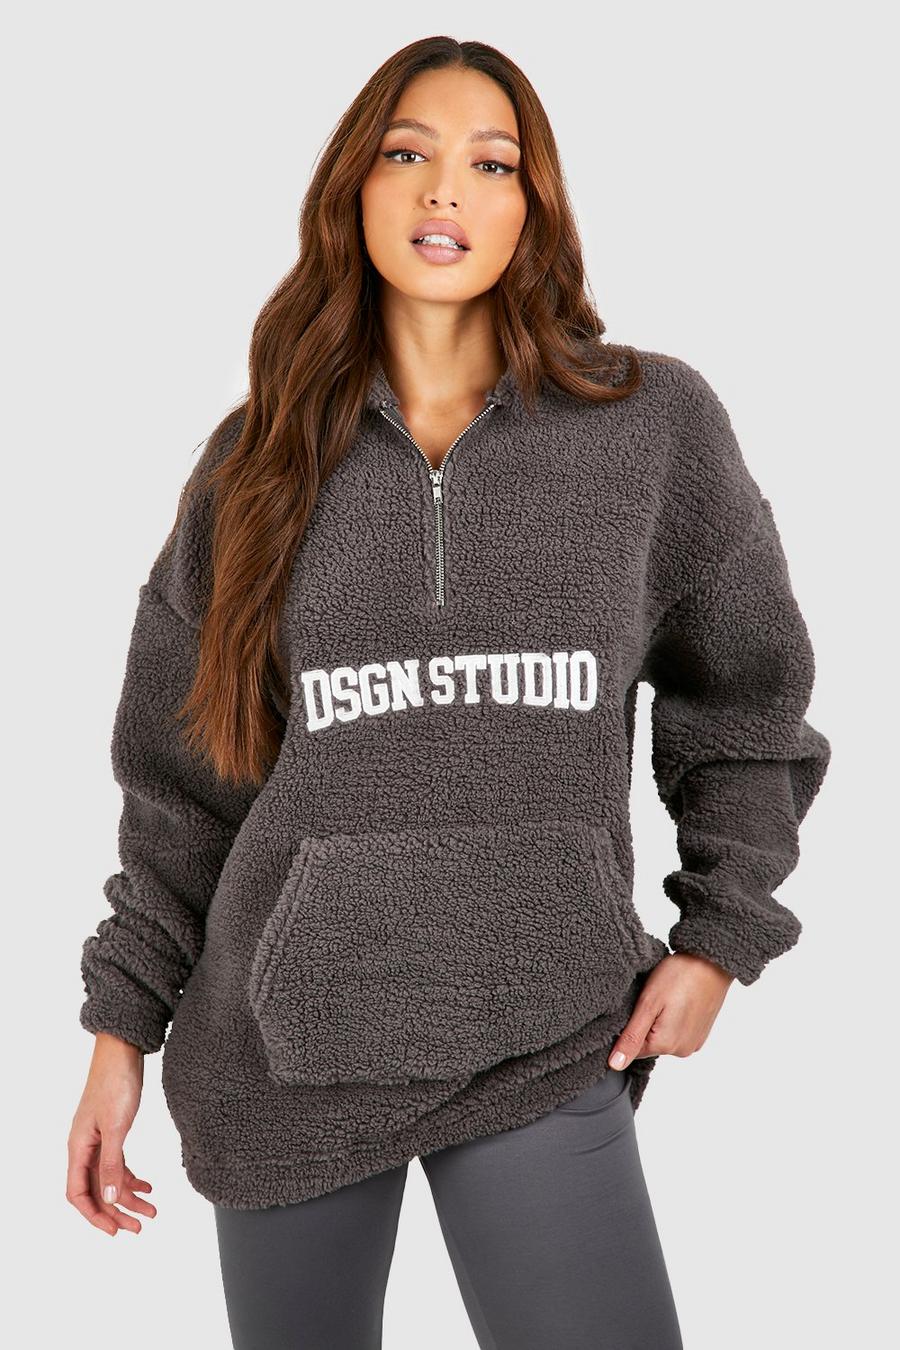 Grey Tall Dsgn Studio Premium Borg Embroidered Oversized Hoodie image number 1